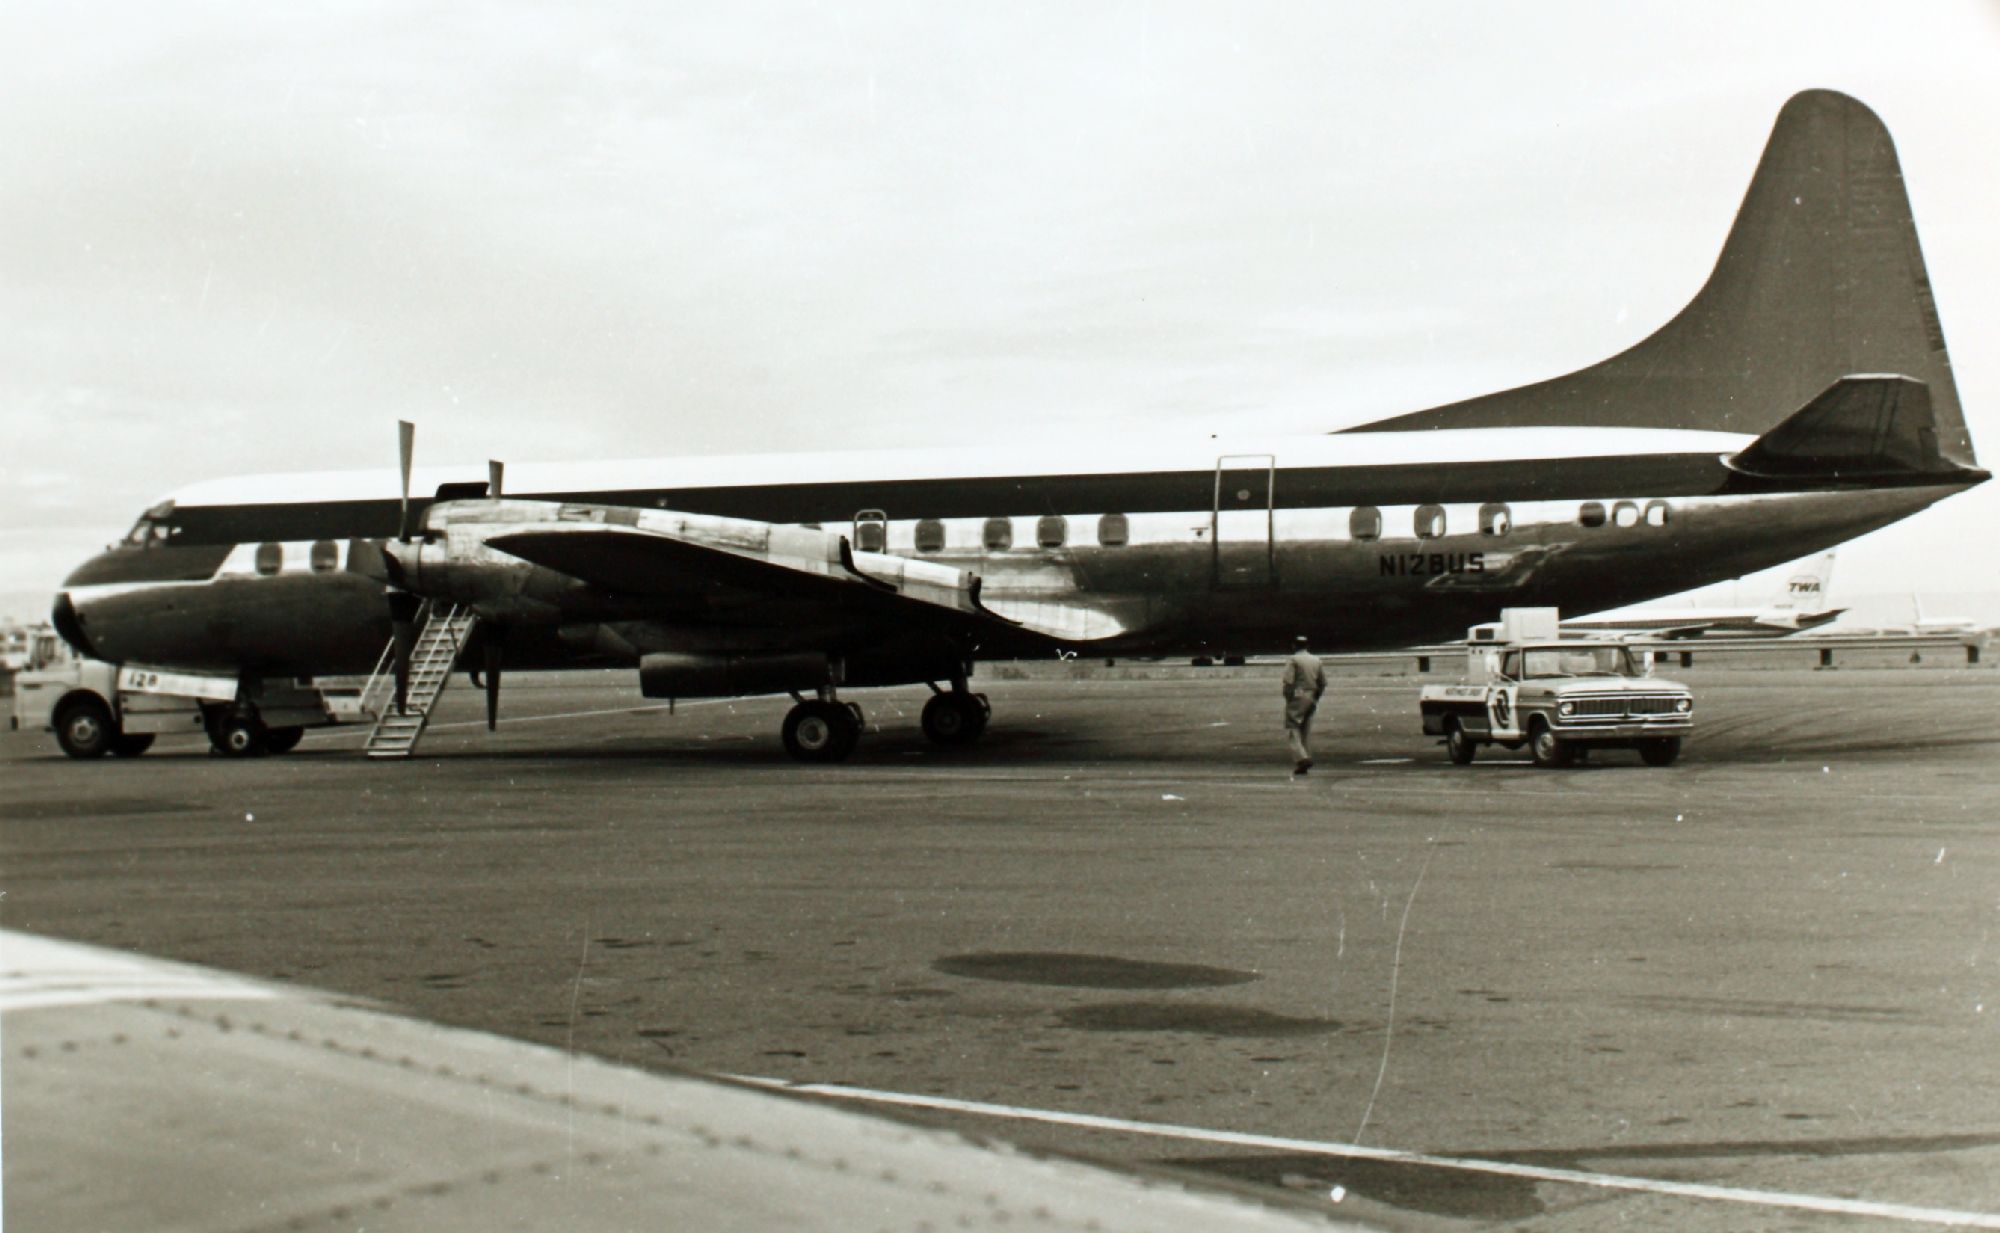 A Northwest Orient Airlines Lockheed Electra on an airport apron.